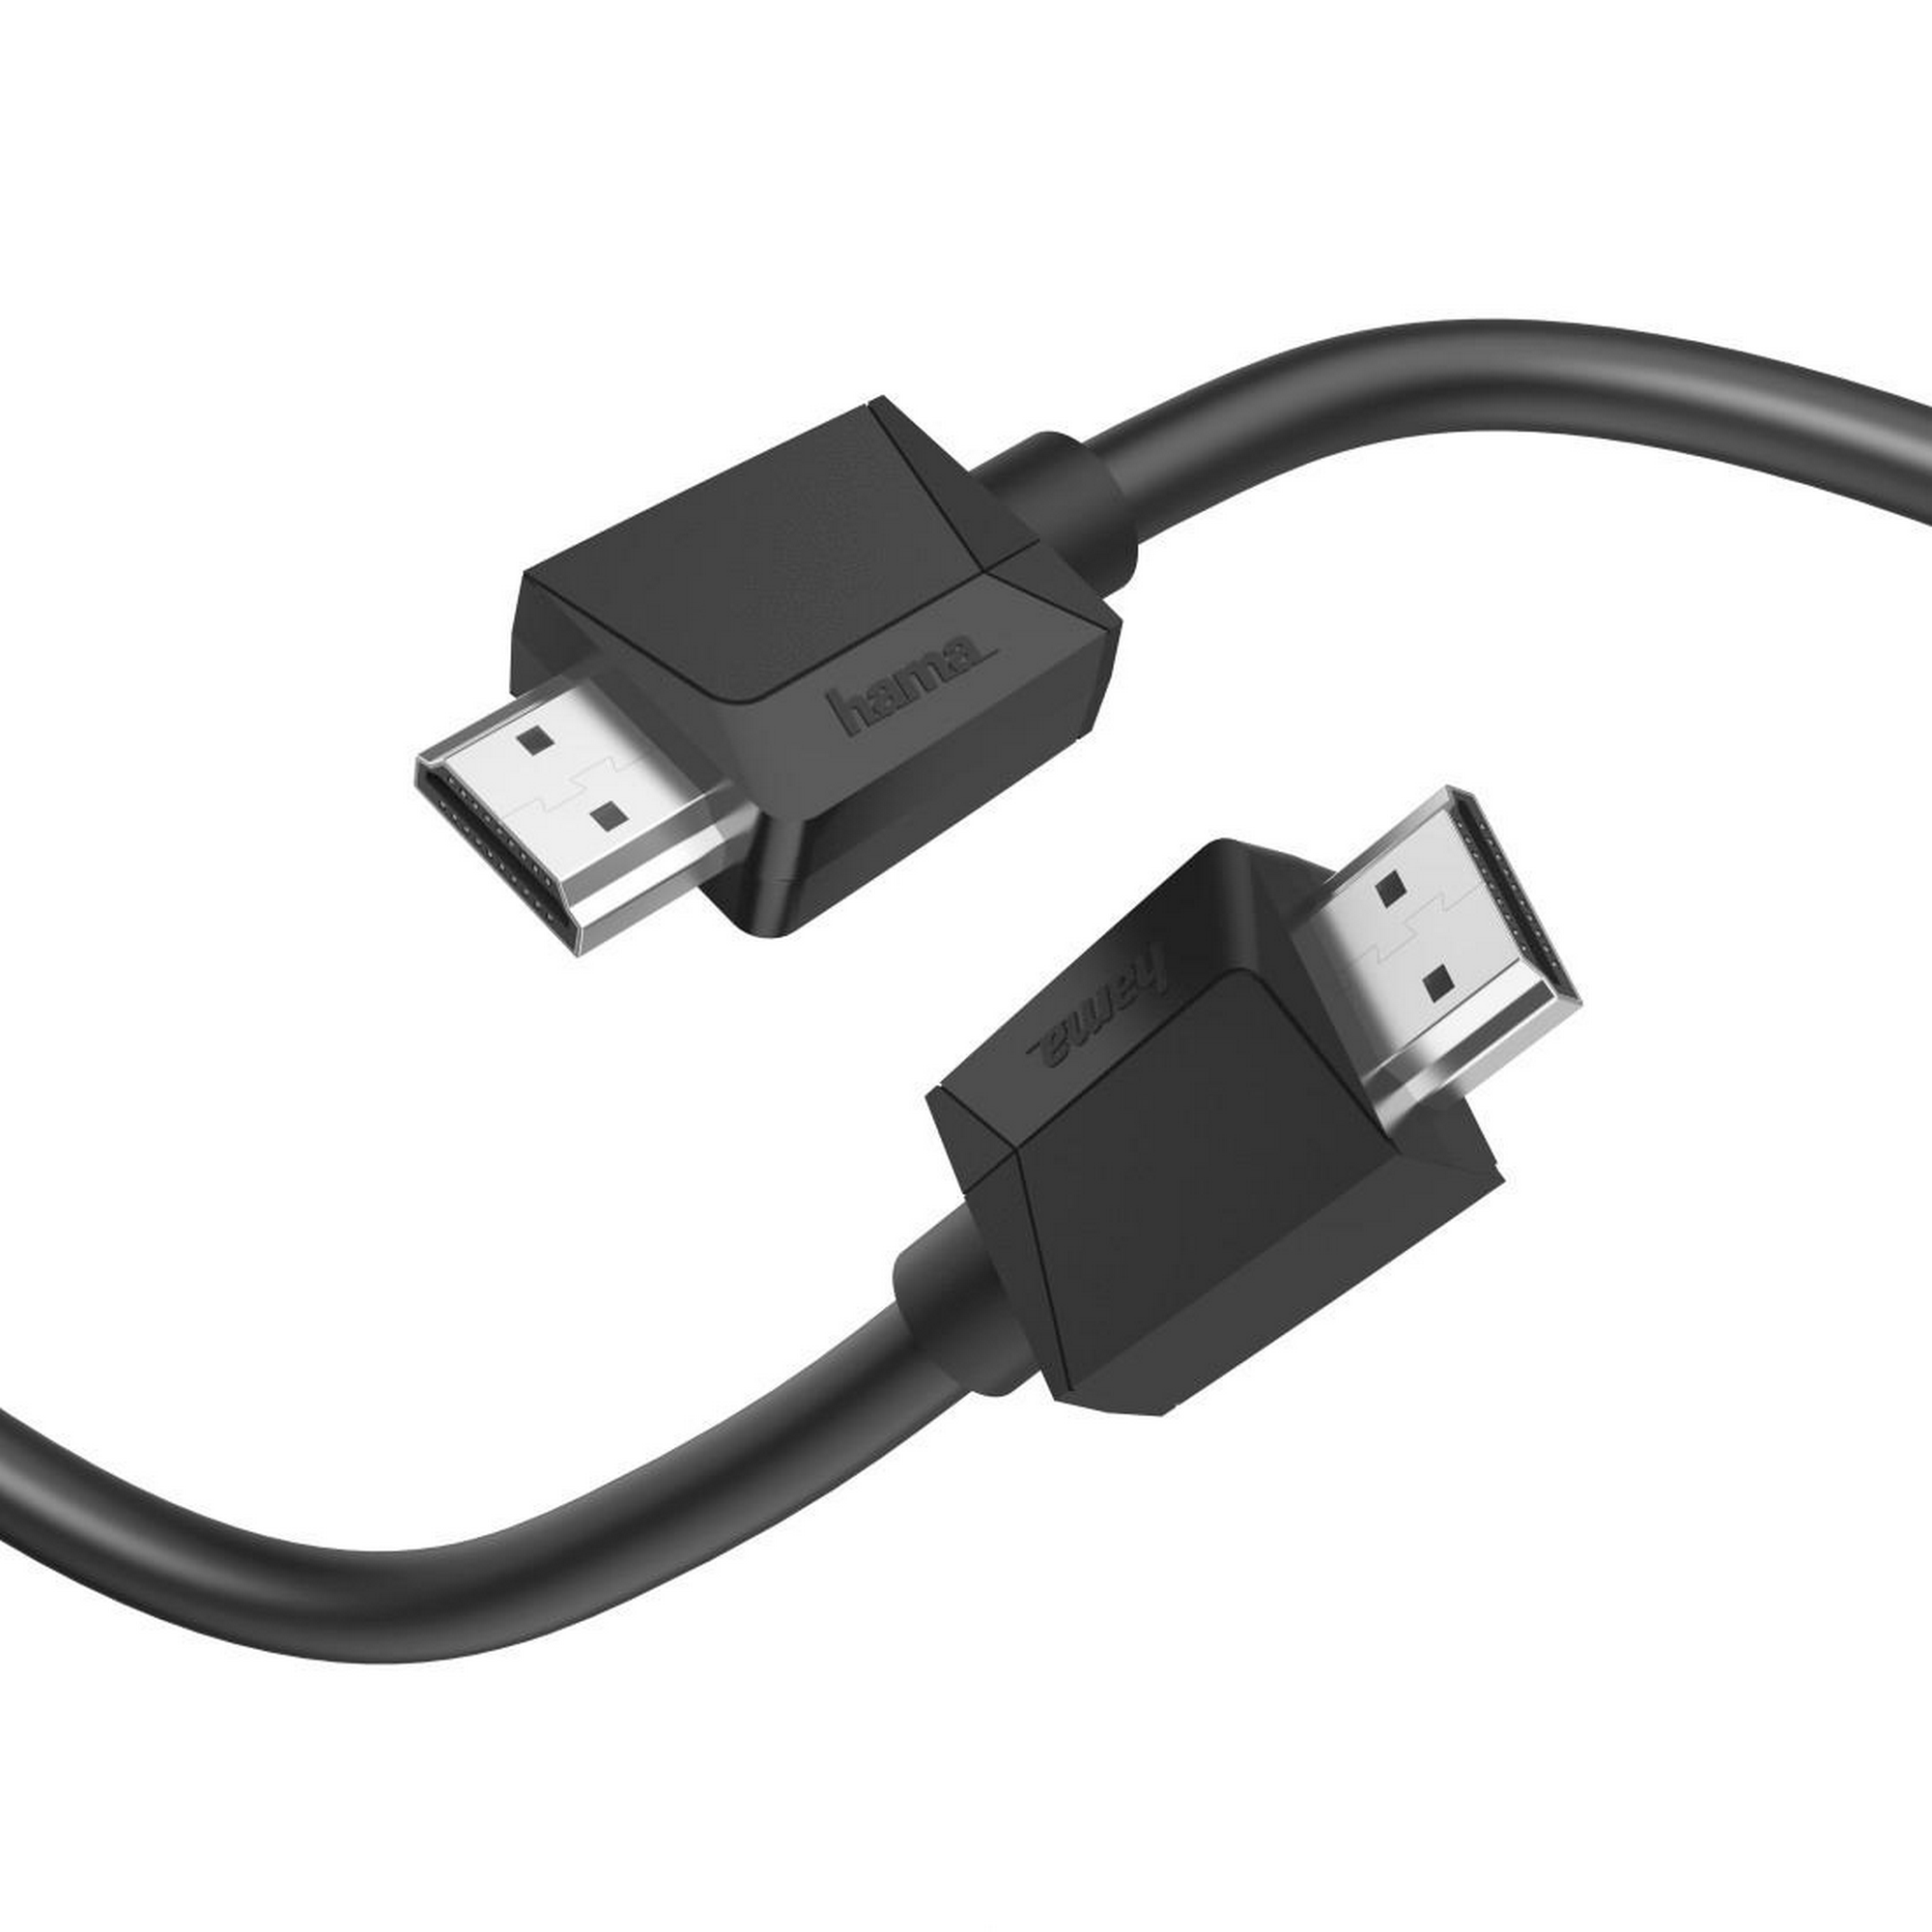 HDMI-Kabel 'Essential Line' High-Speed Ethernet 4K schwarz 1,5 m + product picture